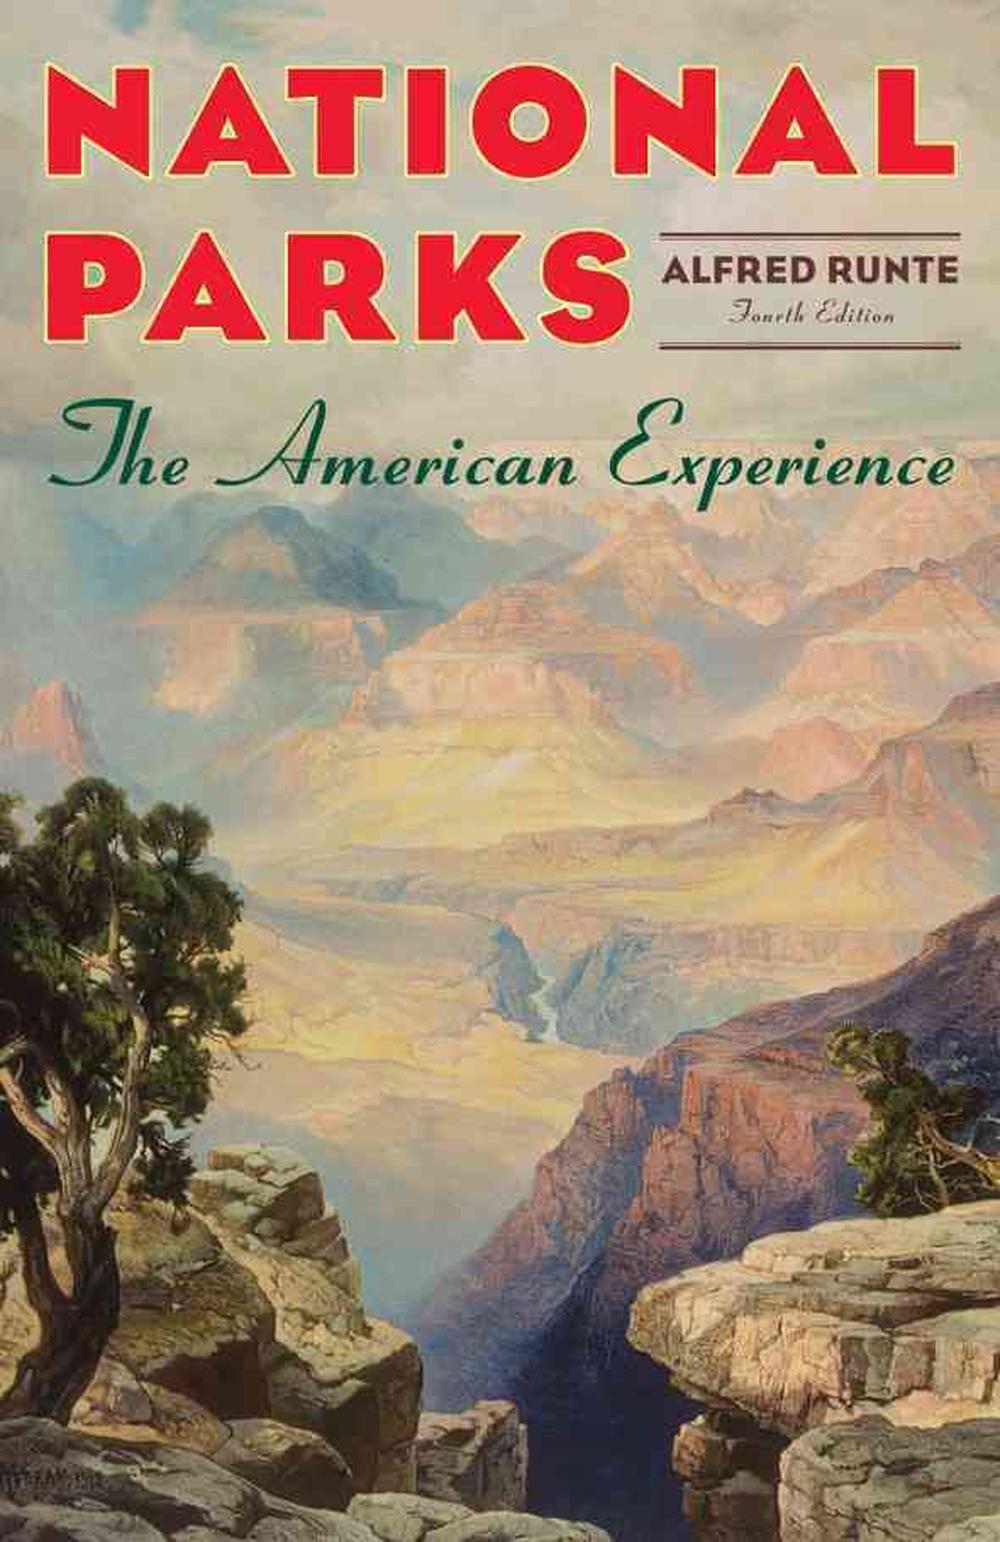 National Parks: The American Experience, 4th Edition Paperback